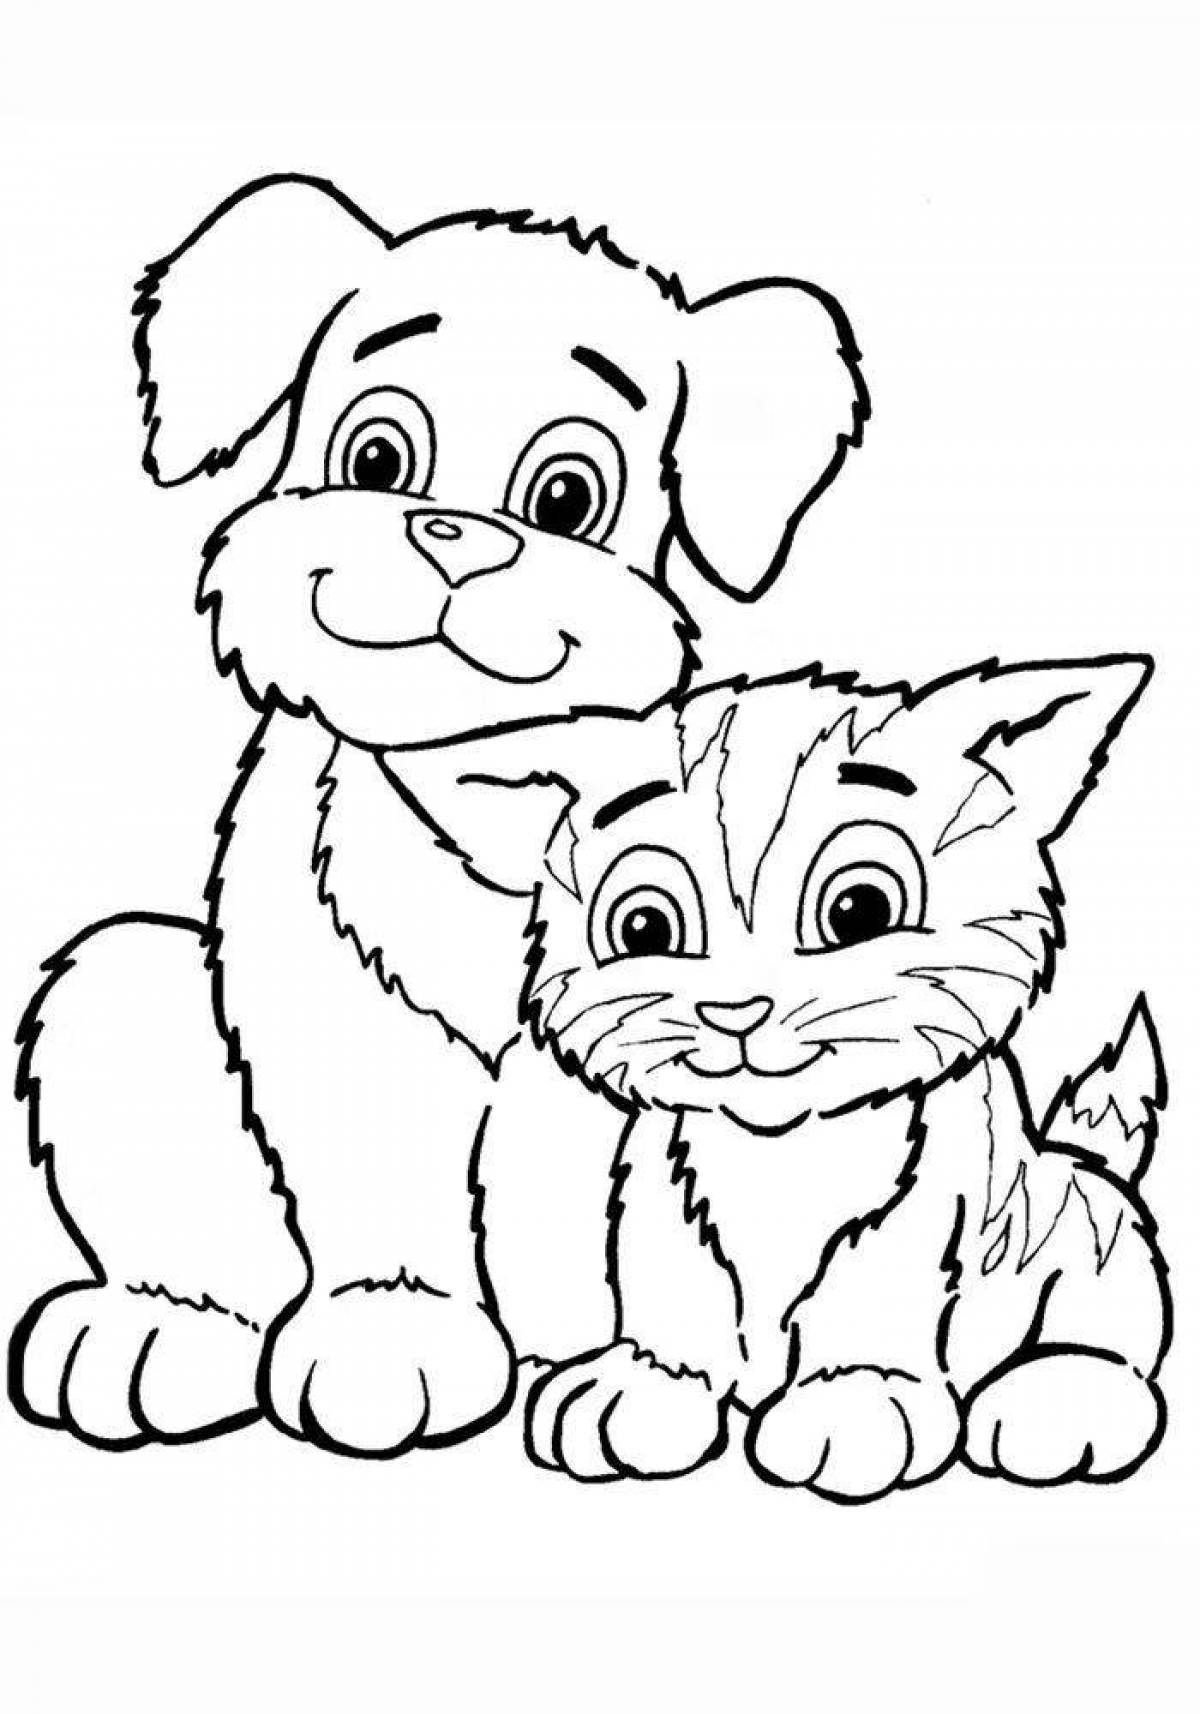 Adorable animal coloring book for kids 6-10 years old